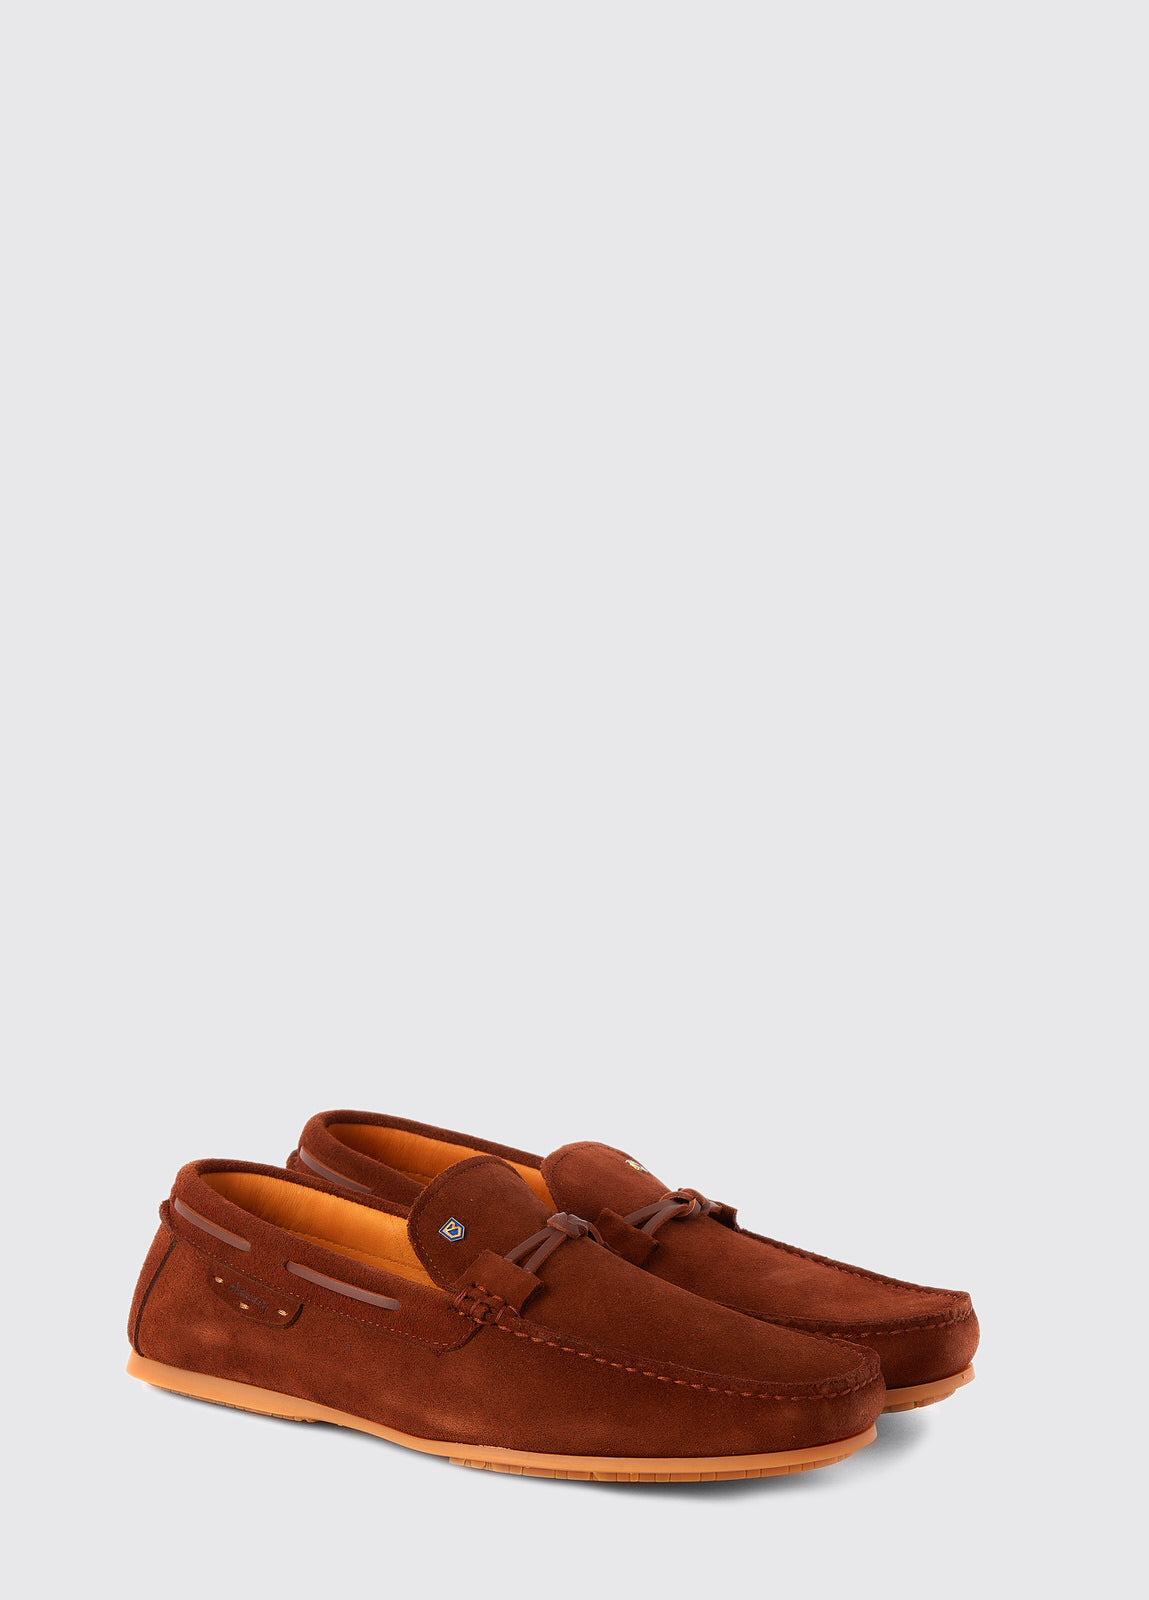 Voyager Deck shoes - Tobacco